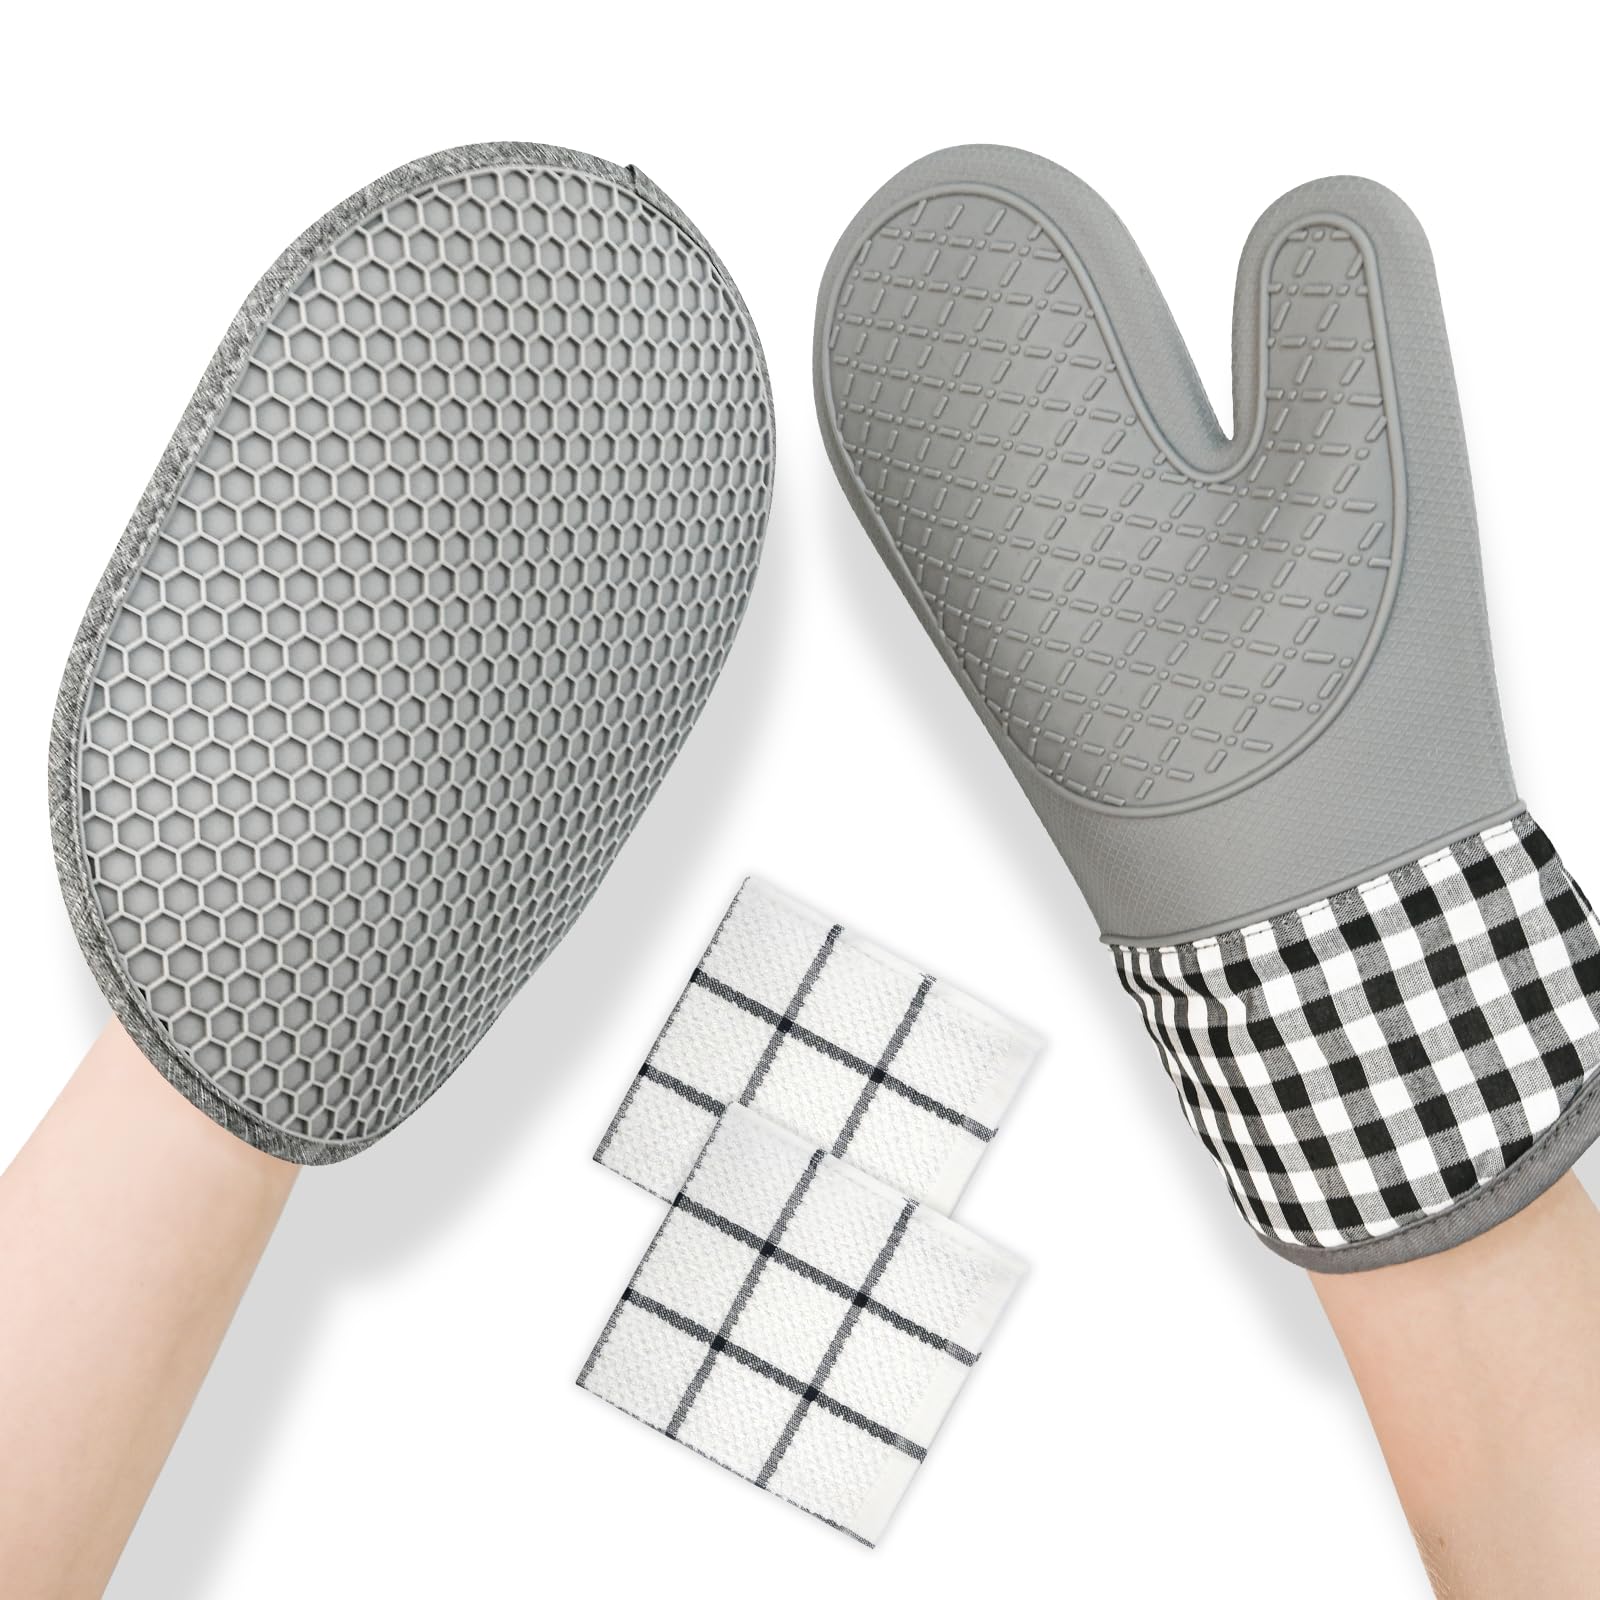 JAOBHAHY Oven Mitts Set, Silicone Oven Mitts and Pot Holders Sets with Hot Pads and Oven Mitts Heat Resistant, 4pcs Bakeware Set for Oven Kitchen Cooking